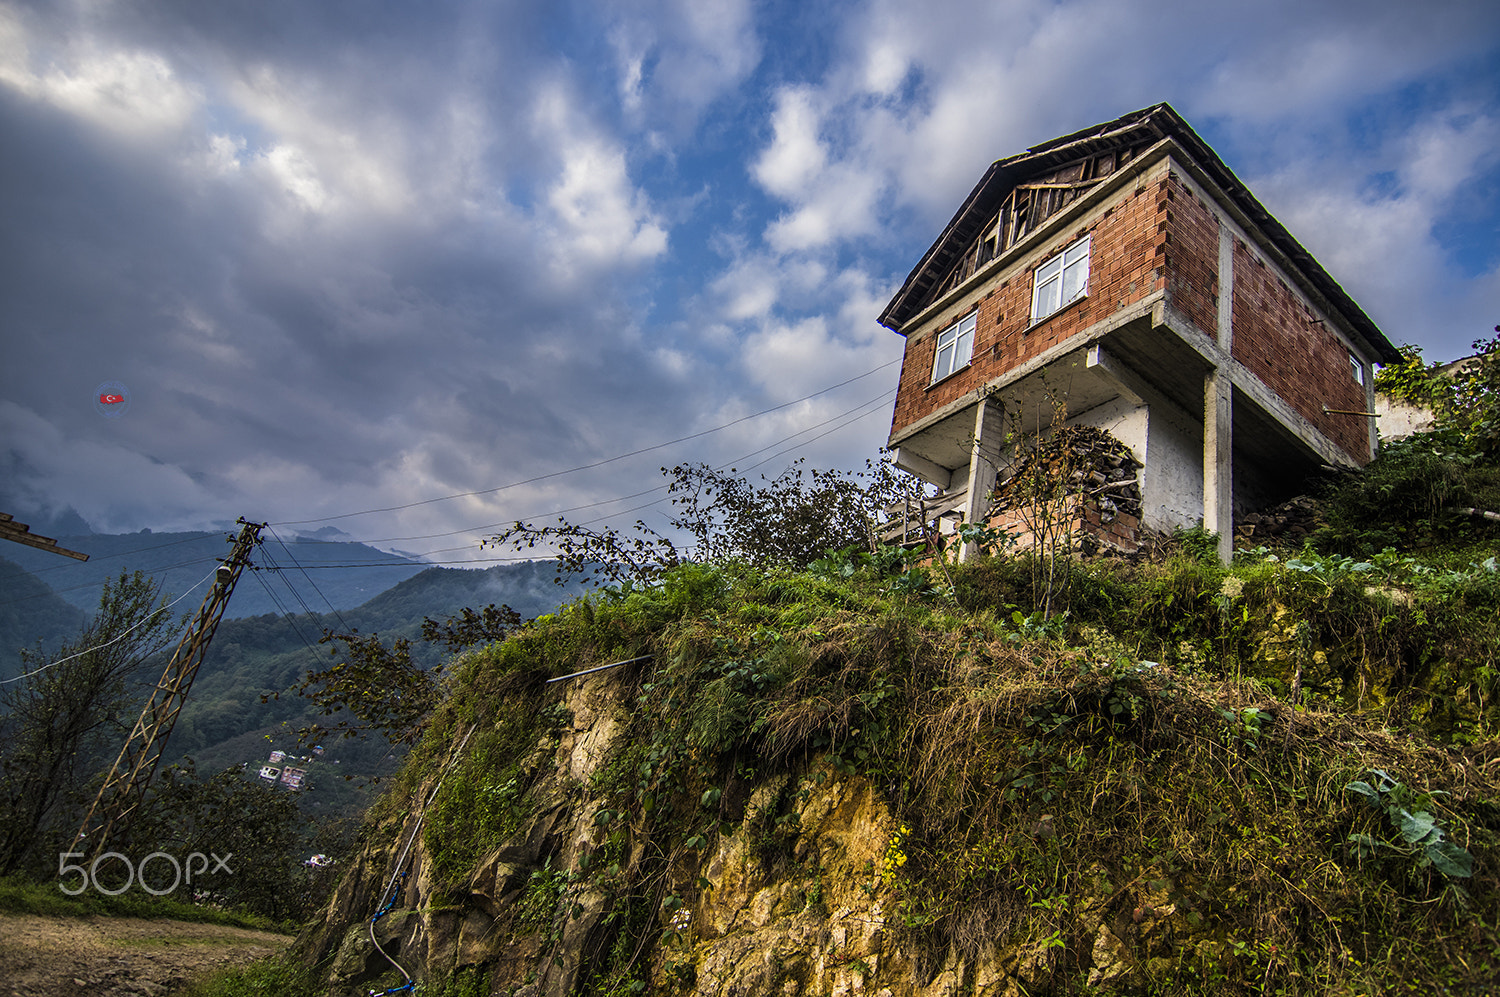 Pentax K-3 II sample photo. Challenging mountain home photography